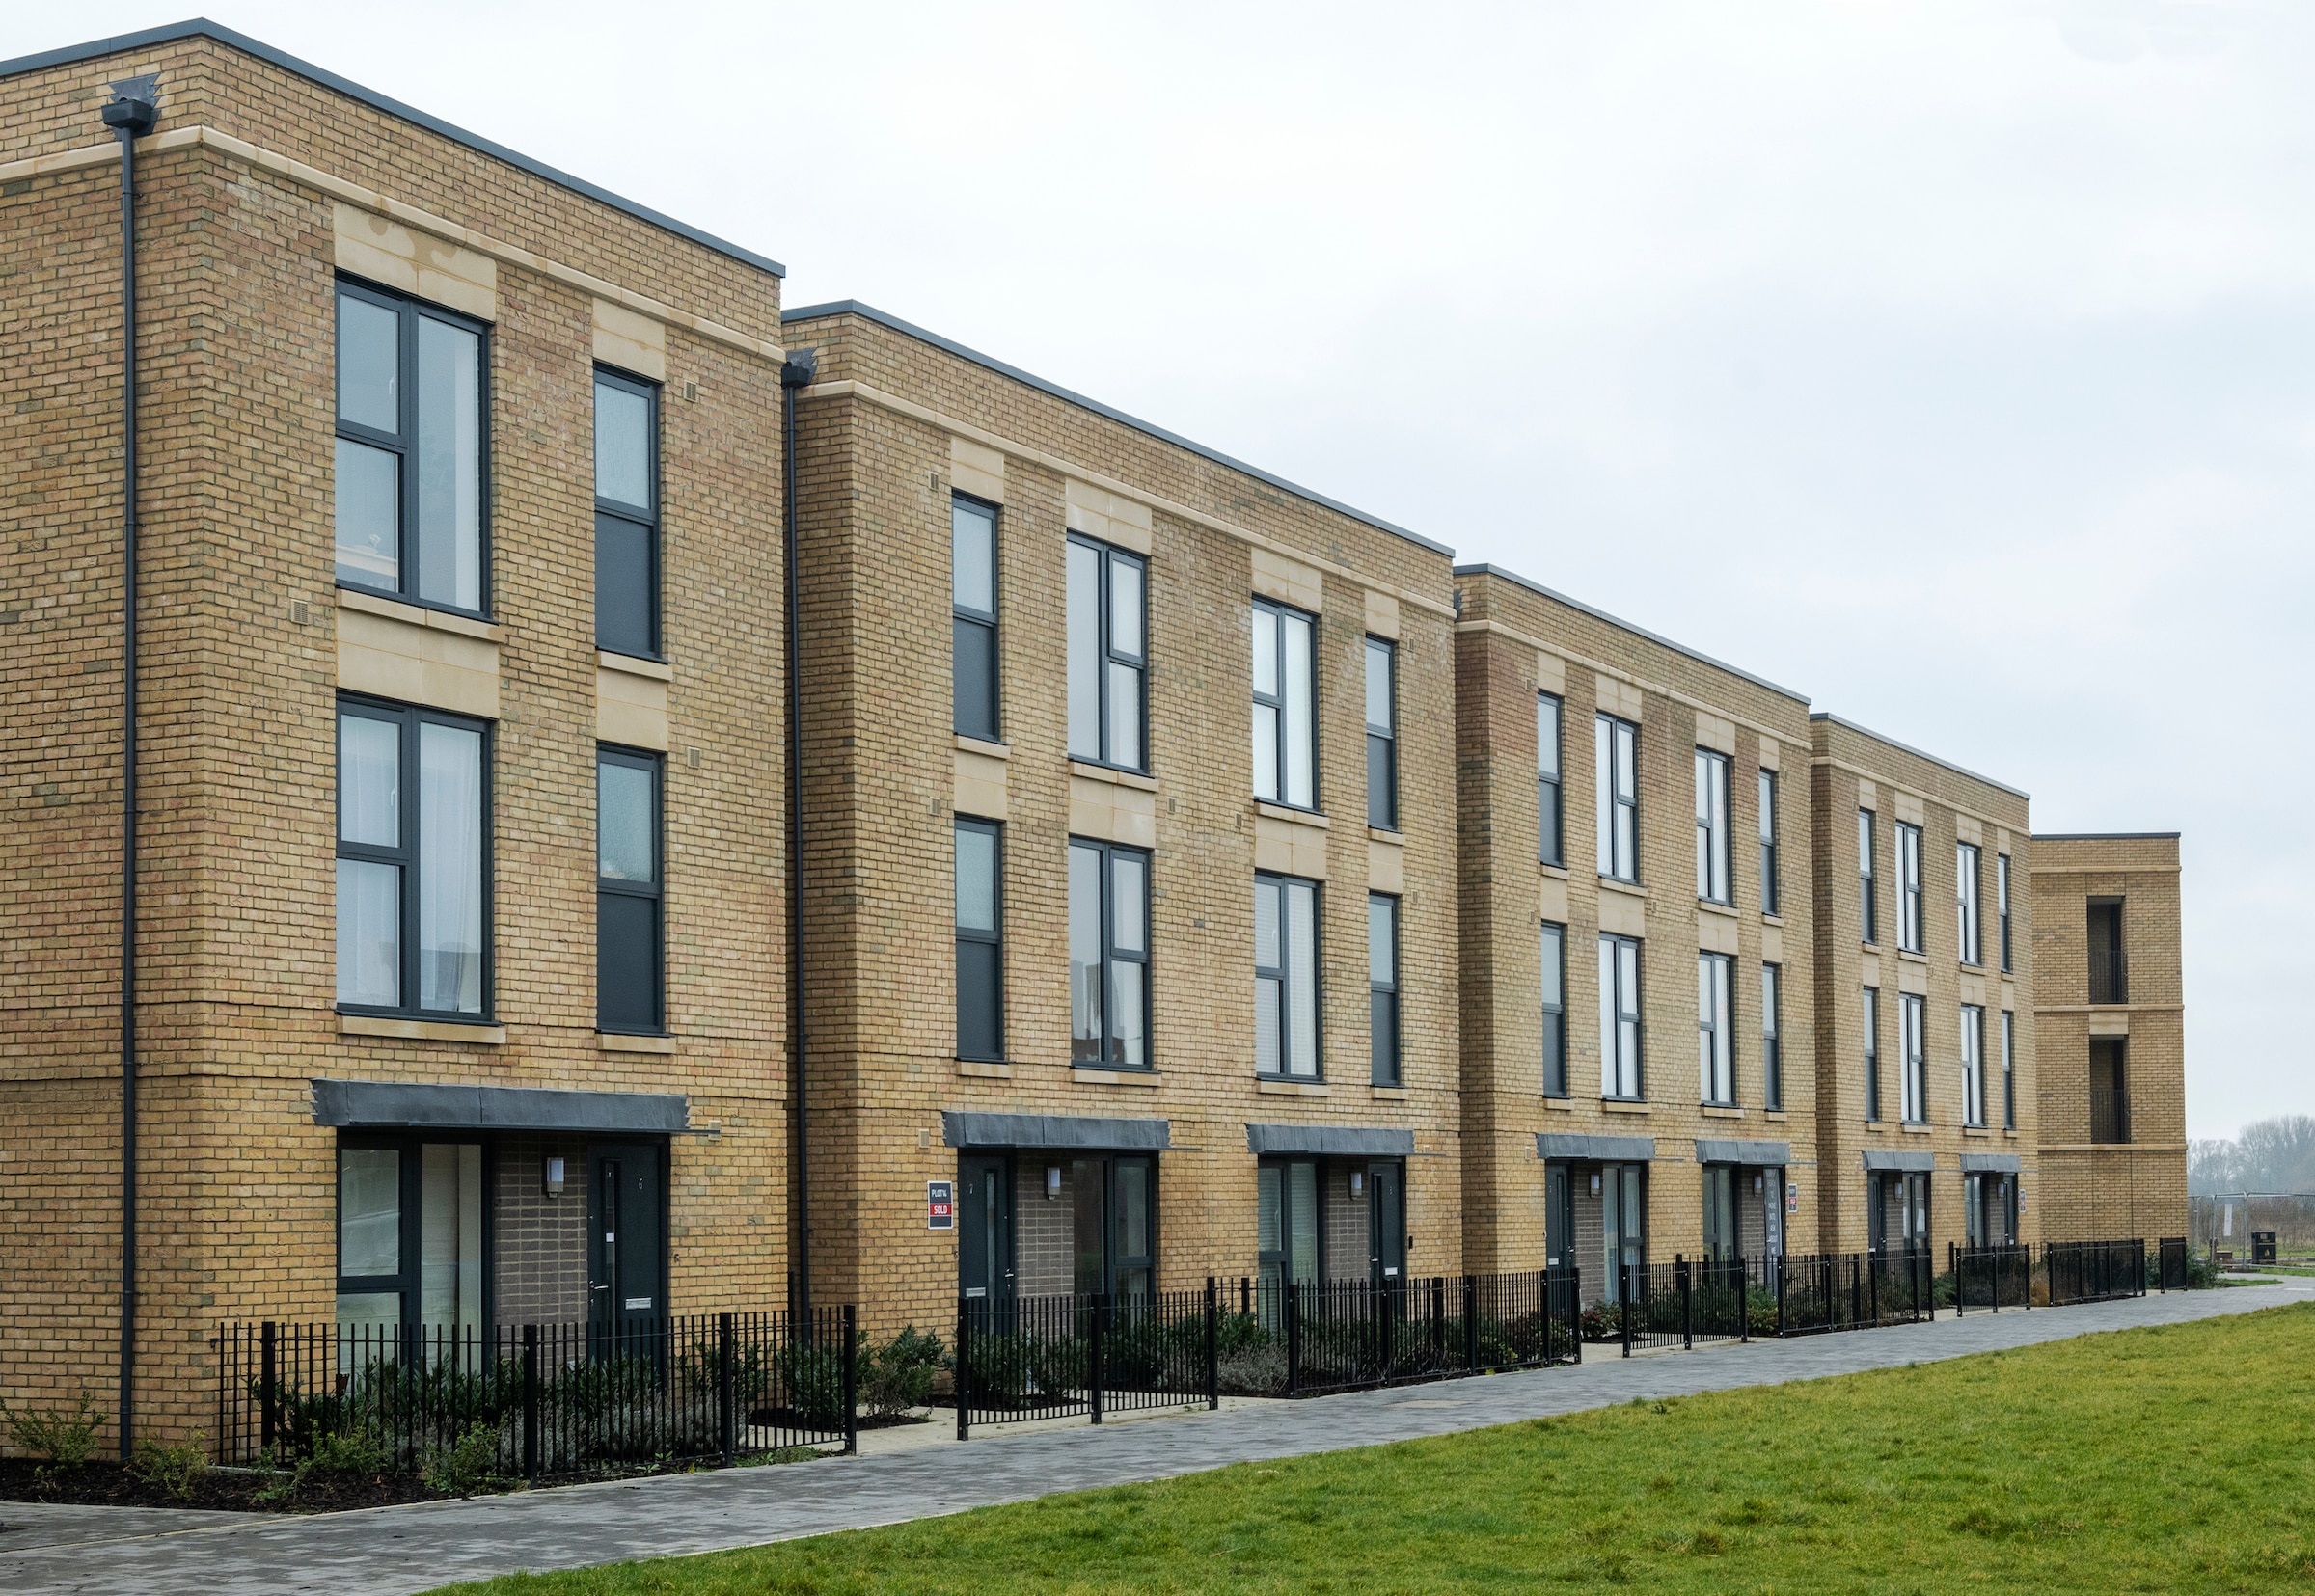 aluminium windows for contractors and developers in a new block of flats. 